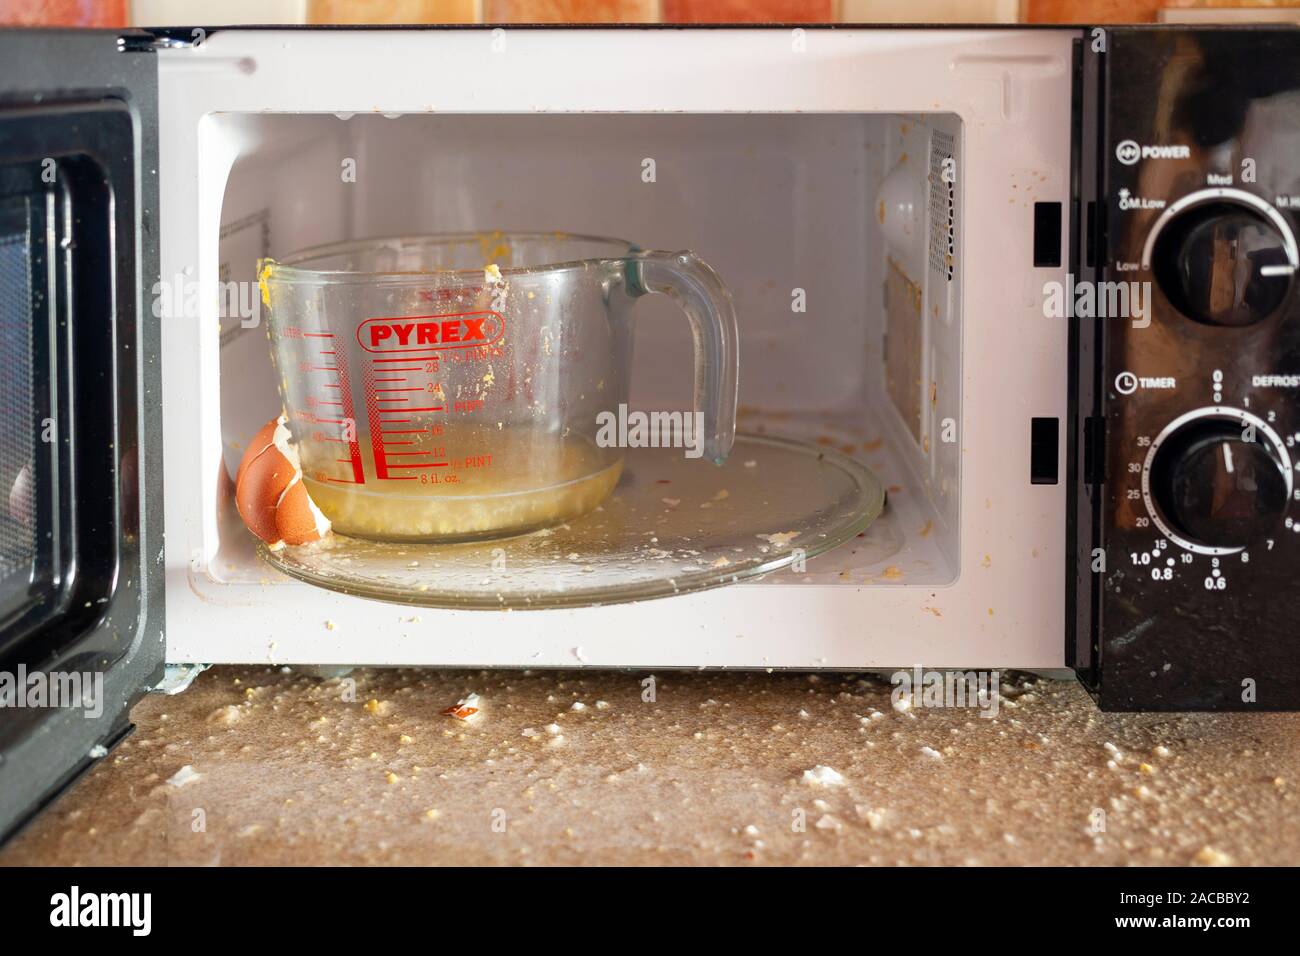 Egg exploded when being boiled in microwave oven Stock Photo